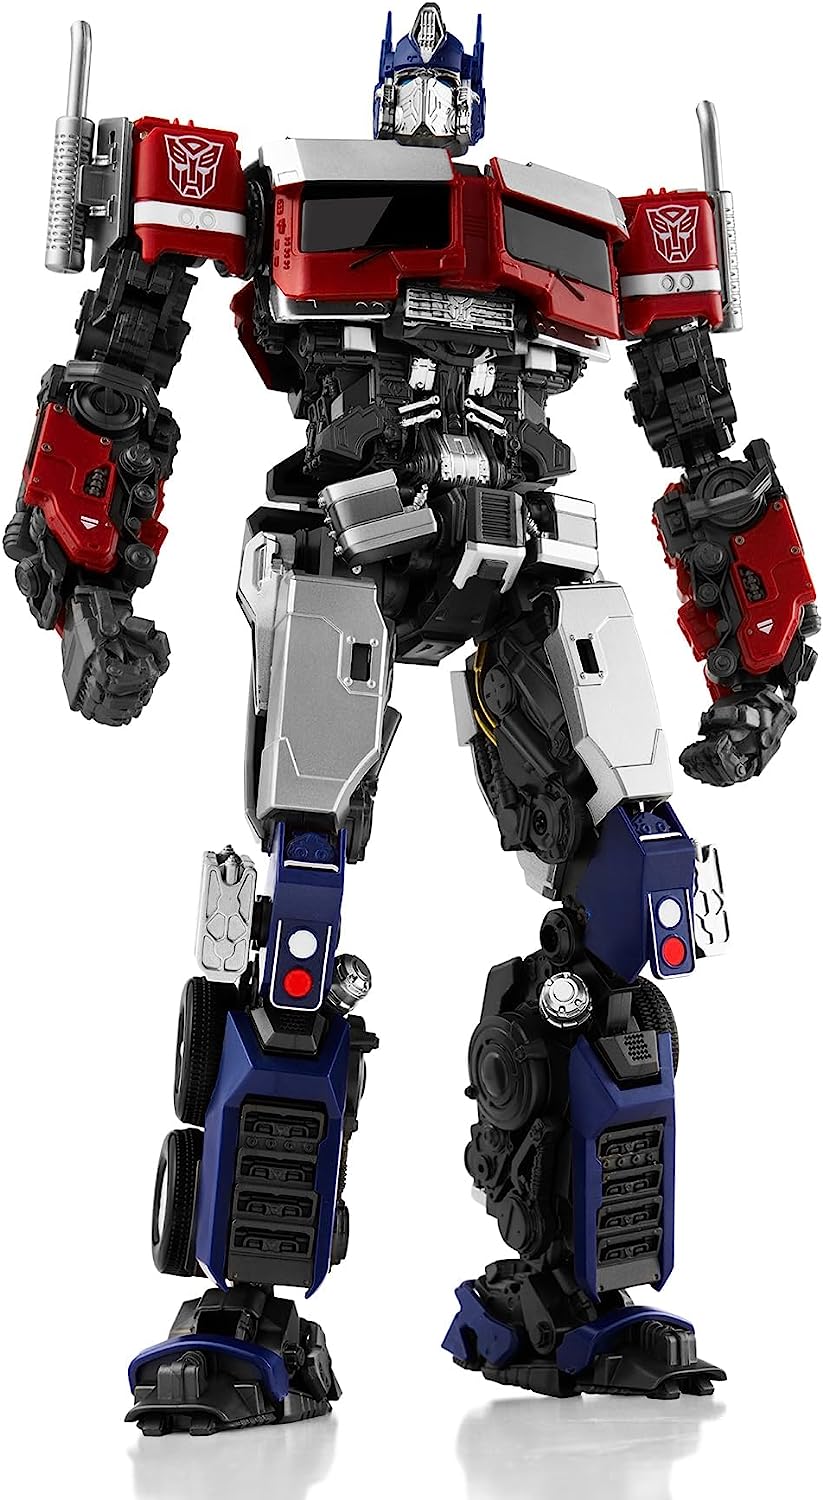 YOLOPARK Optimus Primte Transformer Toy Model Kit｜Transformers The Movie 7 Rise of the Beasts 7.87in Transformer Optimus Prime Action Figures, Collectible Transformer Toys for Transformers Lovers Fans - image 1 of 9